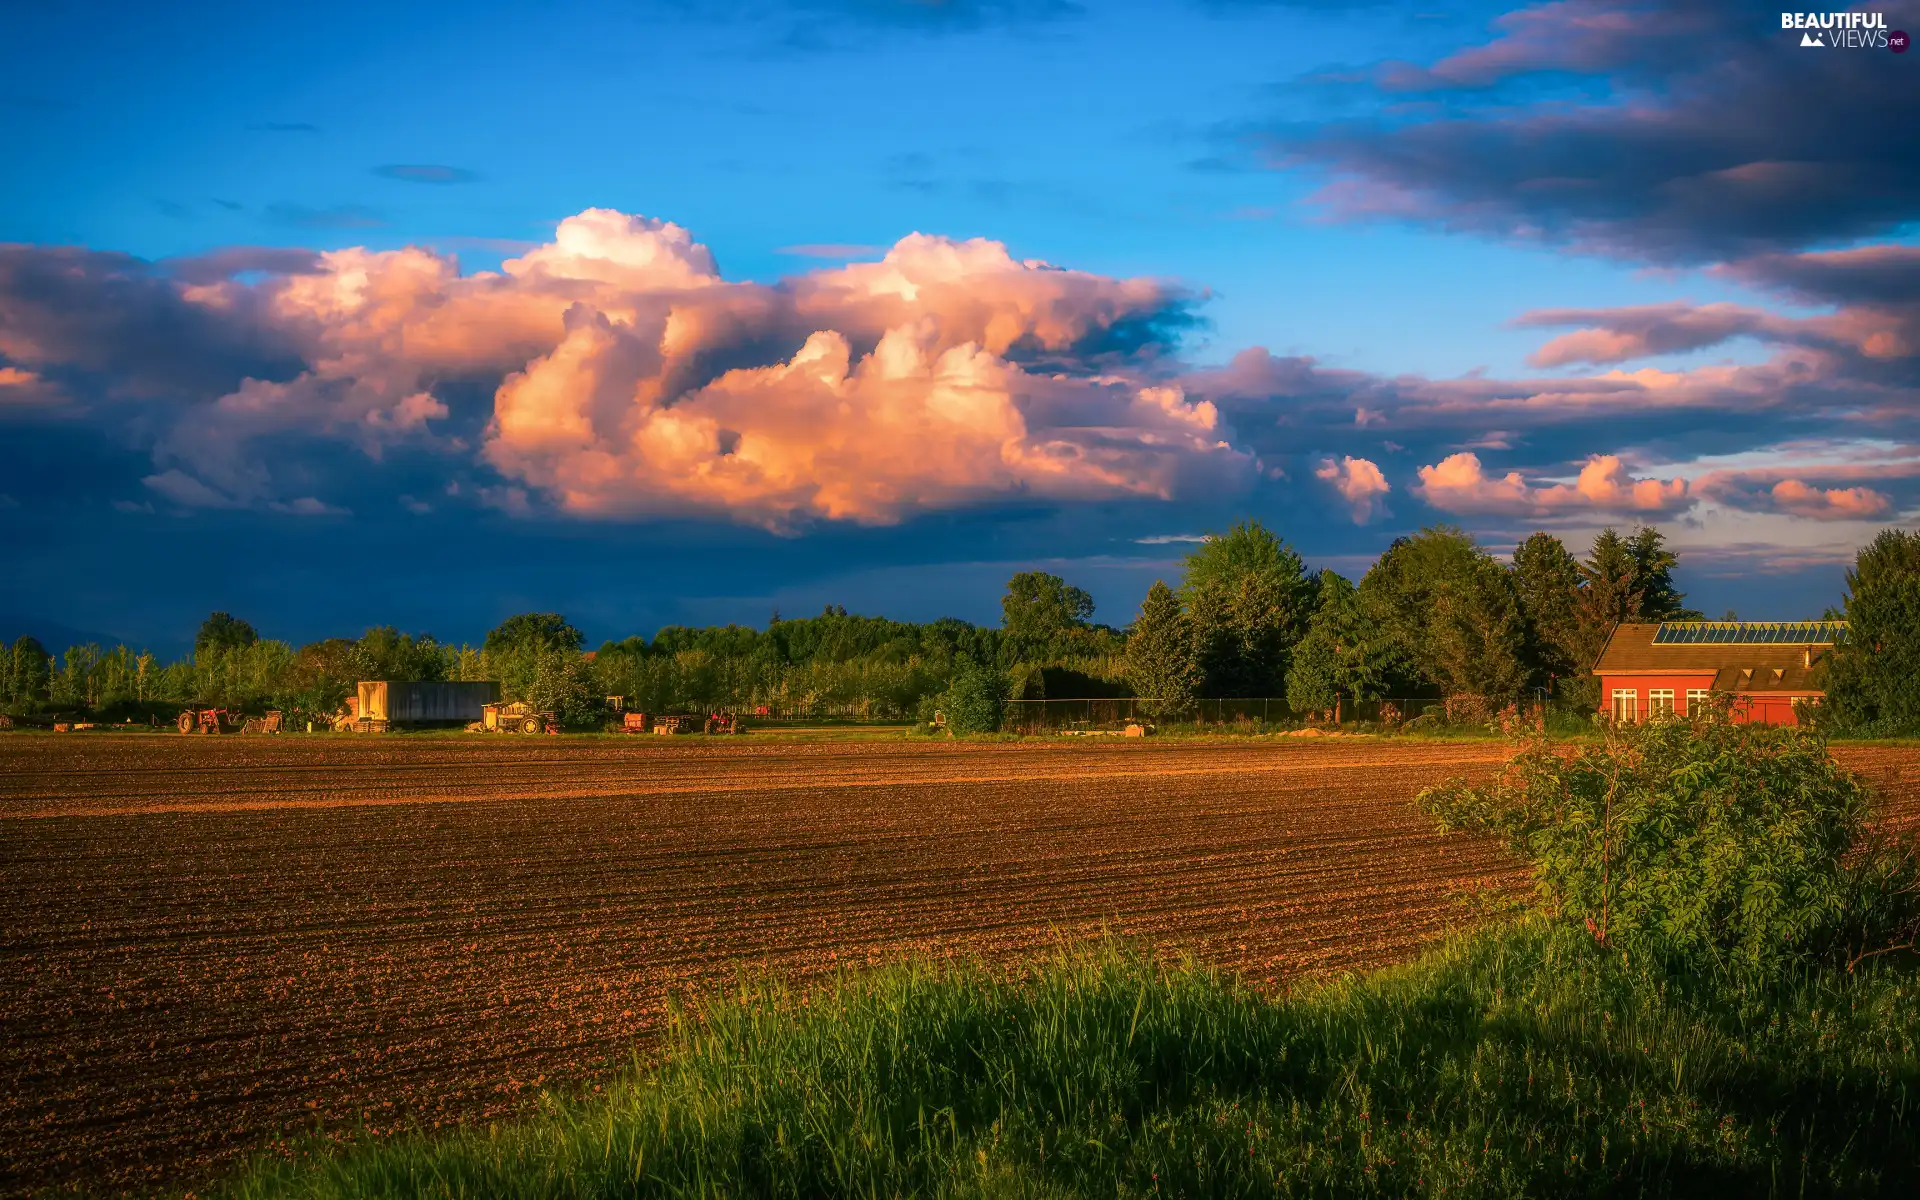 trees, Houses, Sky, clouds, viewes, Field